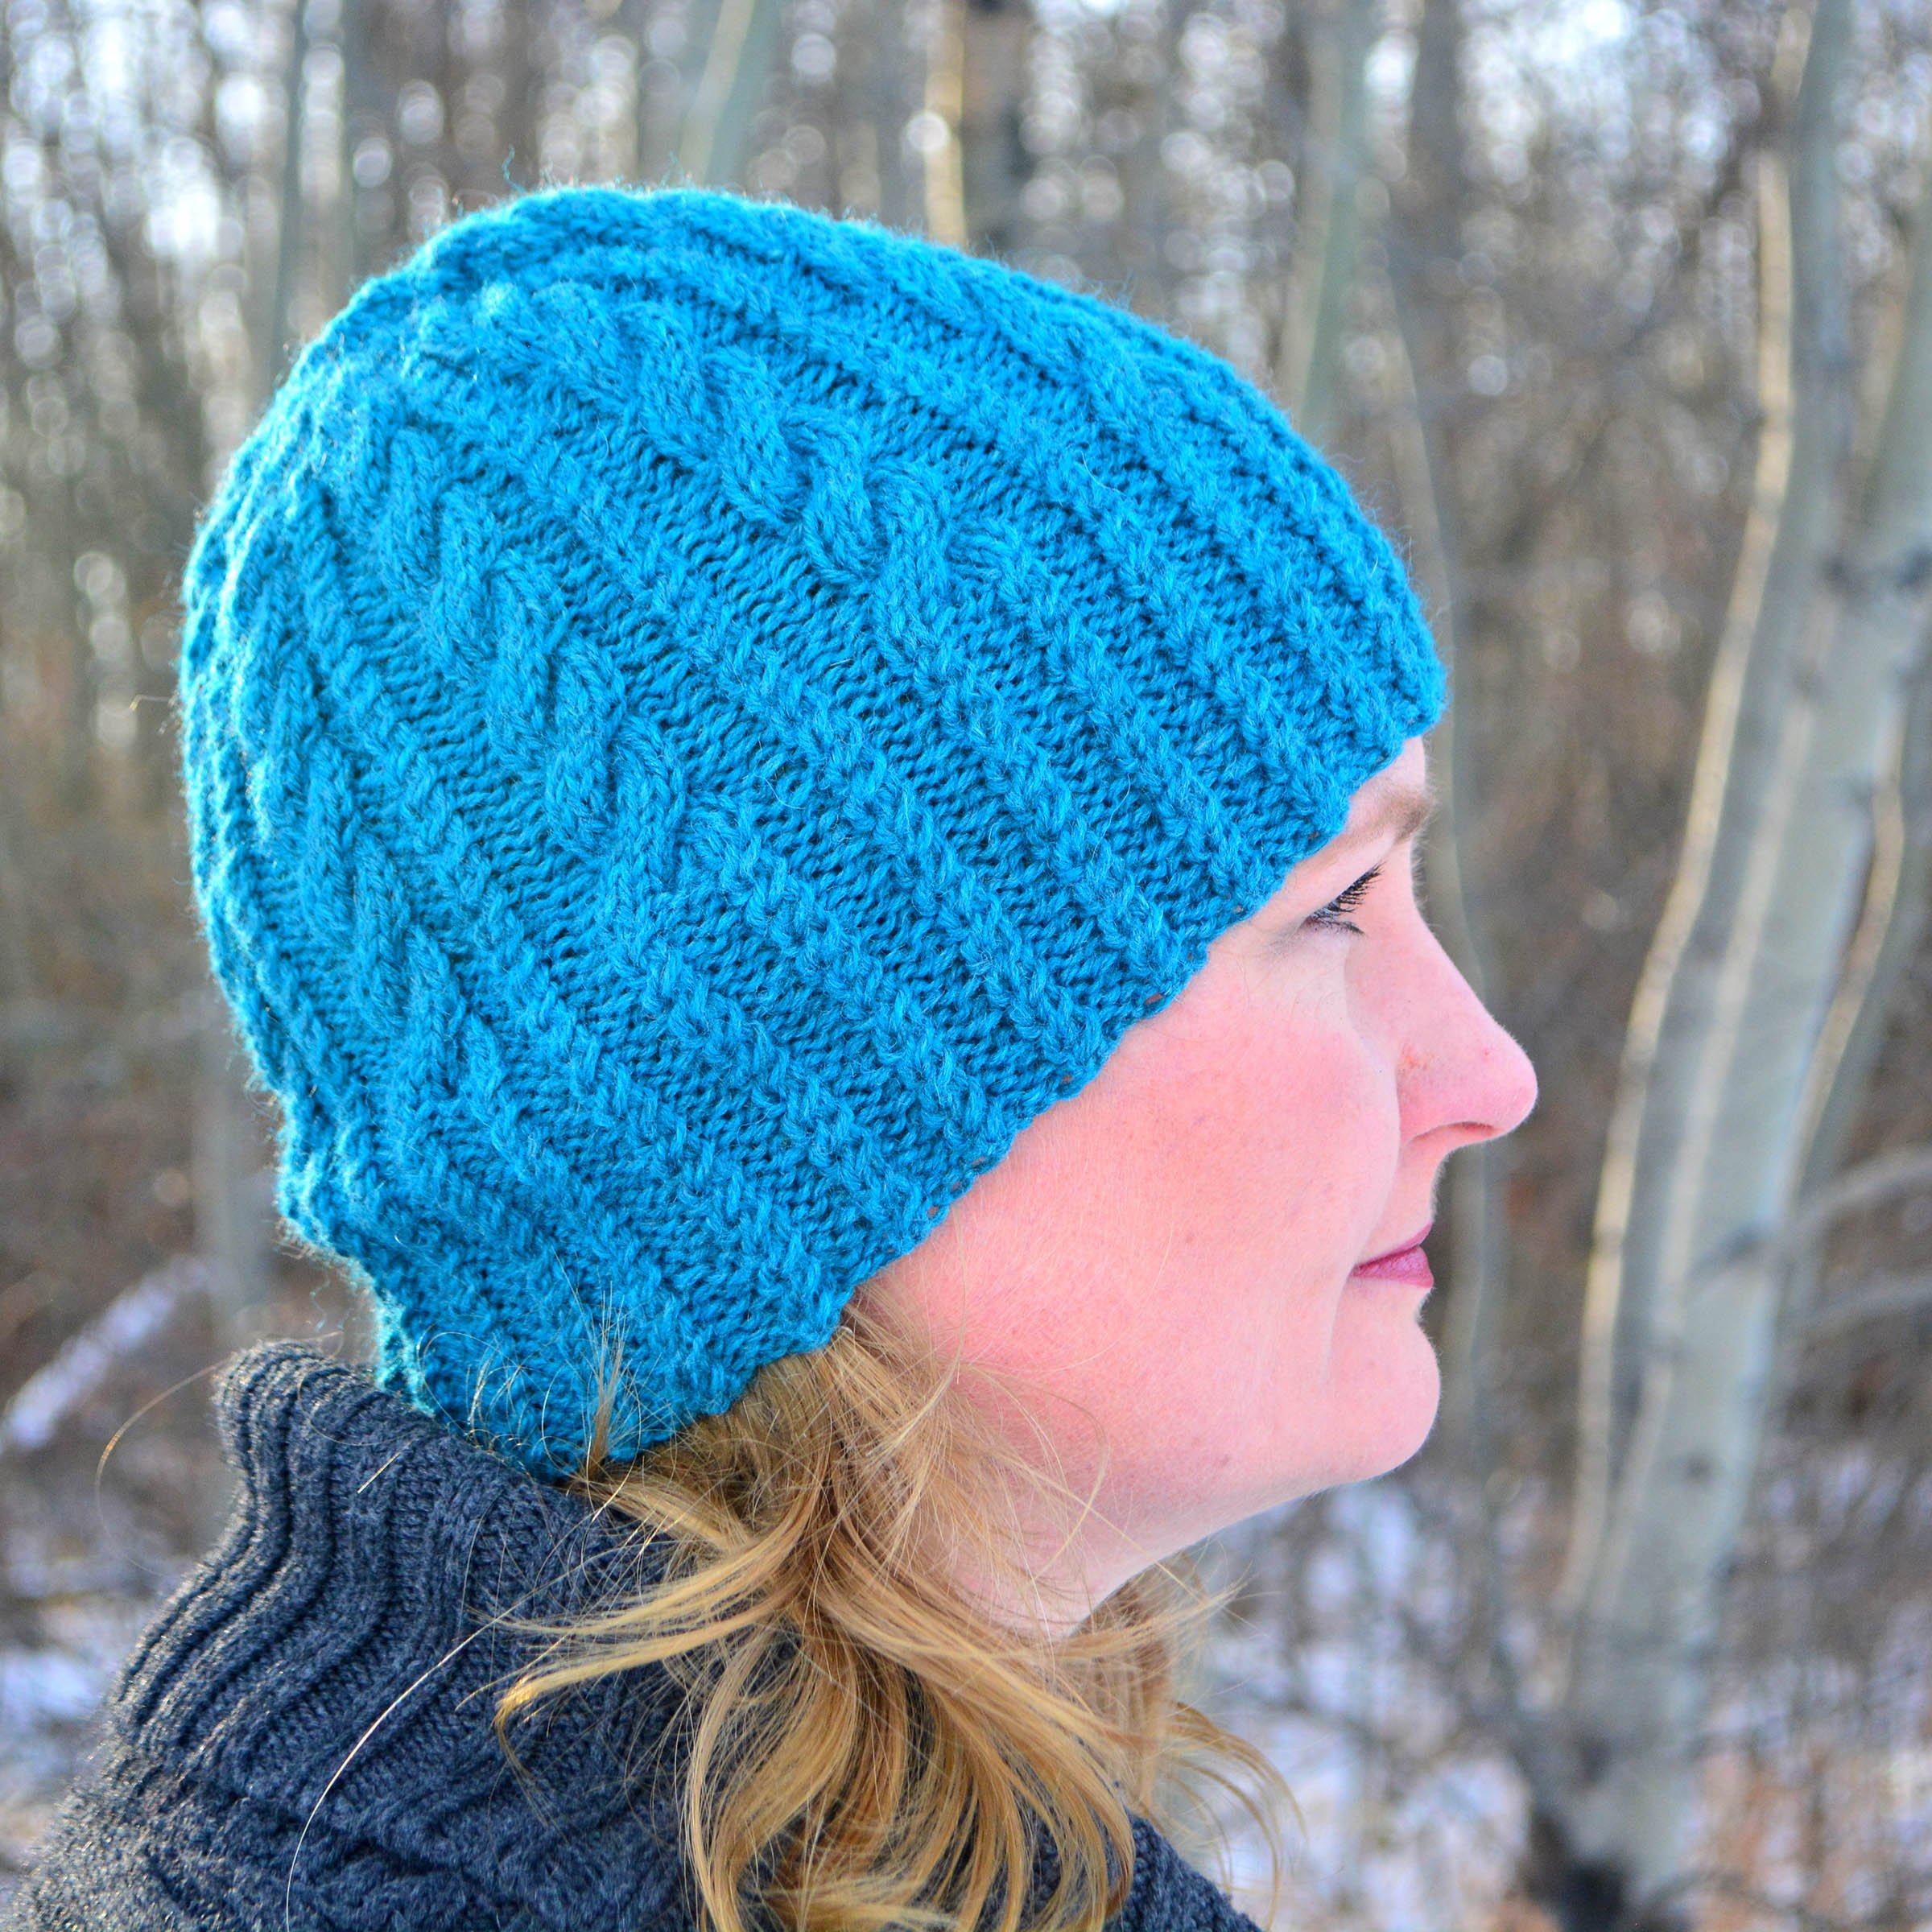 Talena in profile wearing a blue cable-knit hat in front of snowy trees